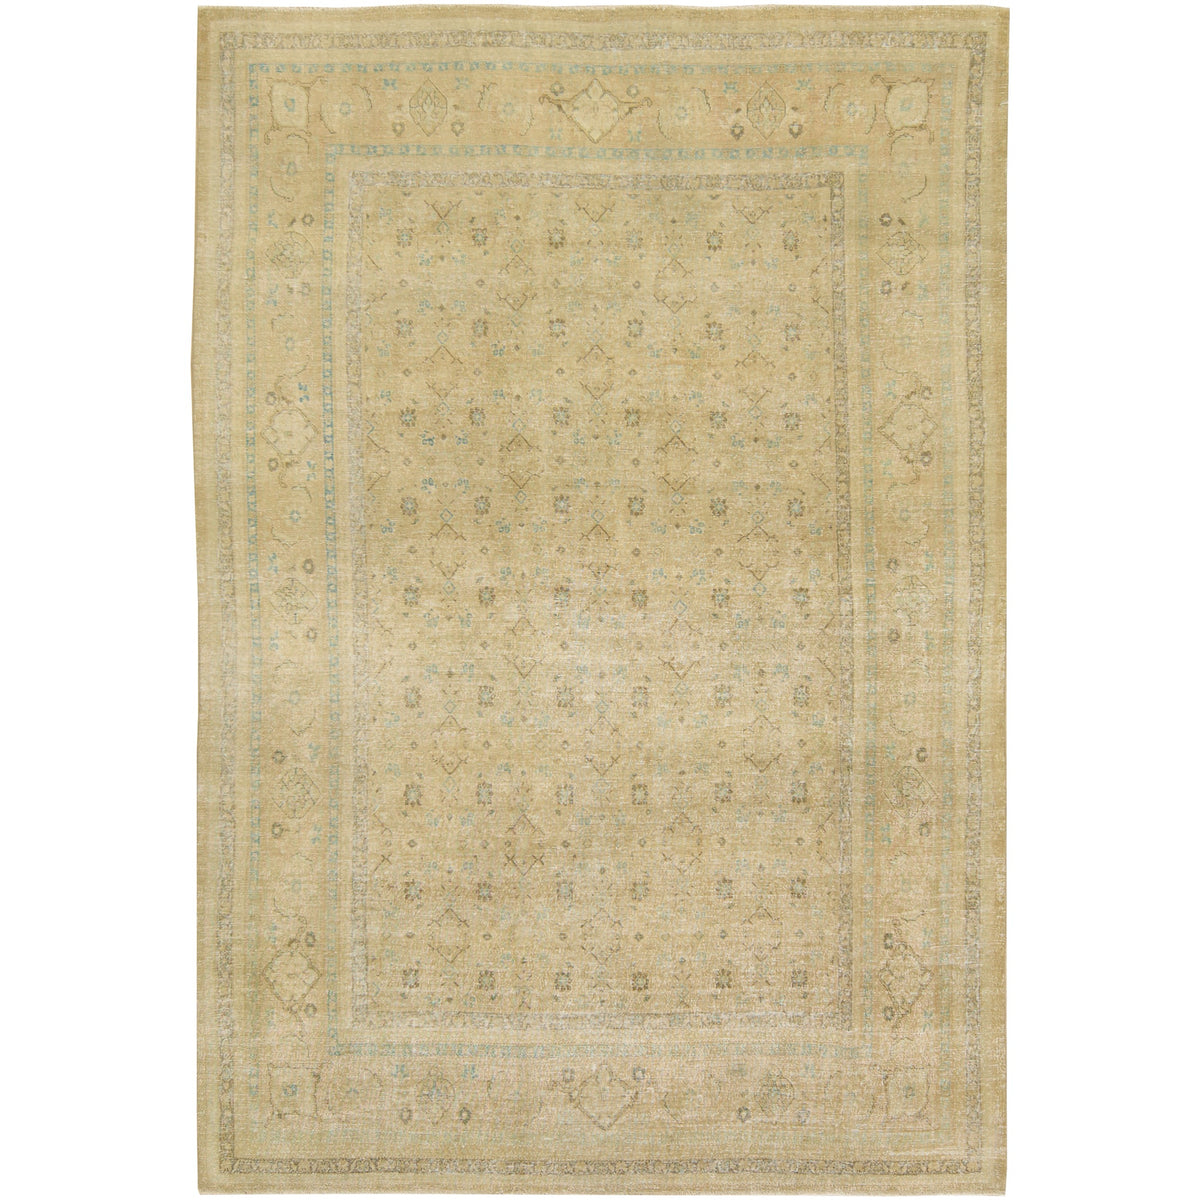 Handwoven tradition meets modern style: The Juniper Rug | Kuden Rugs